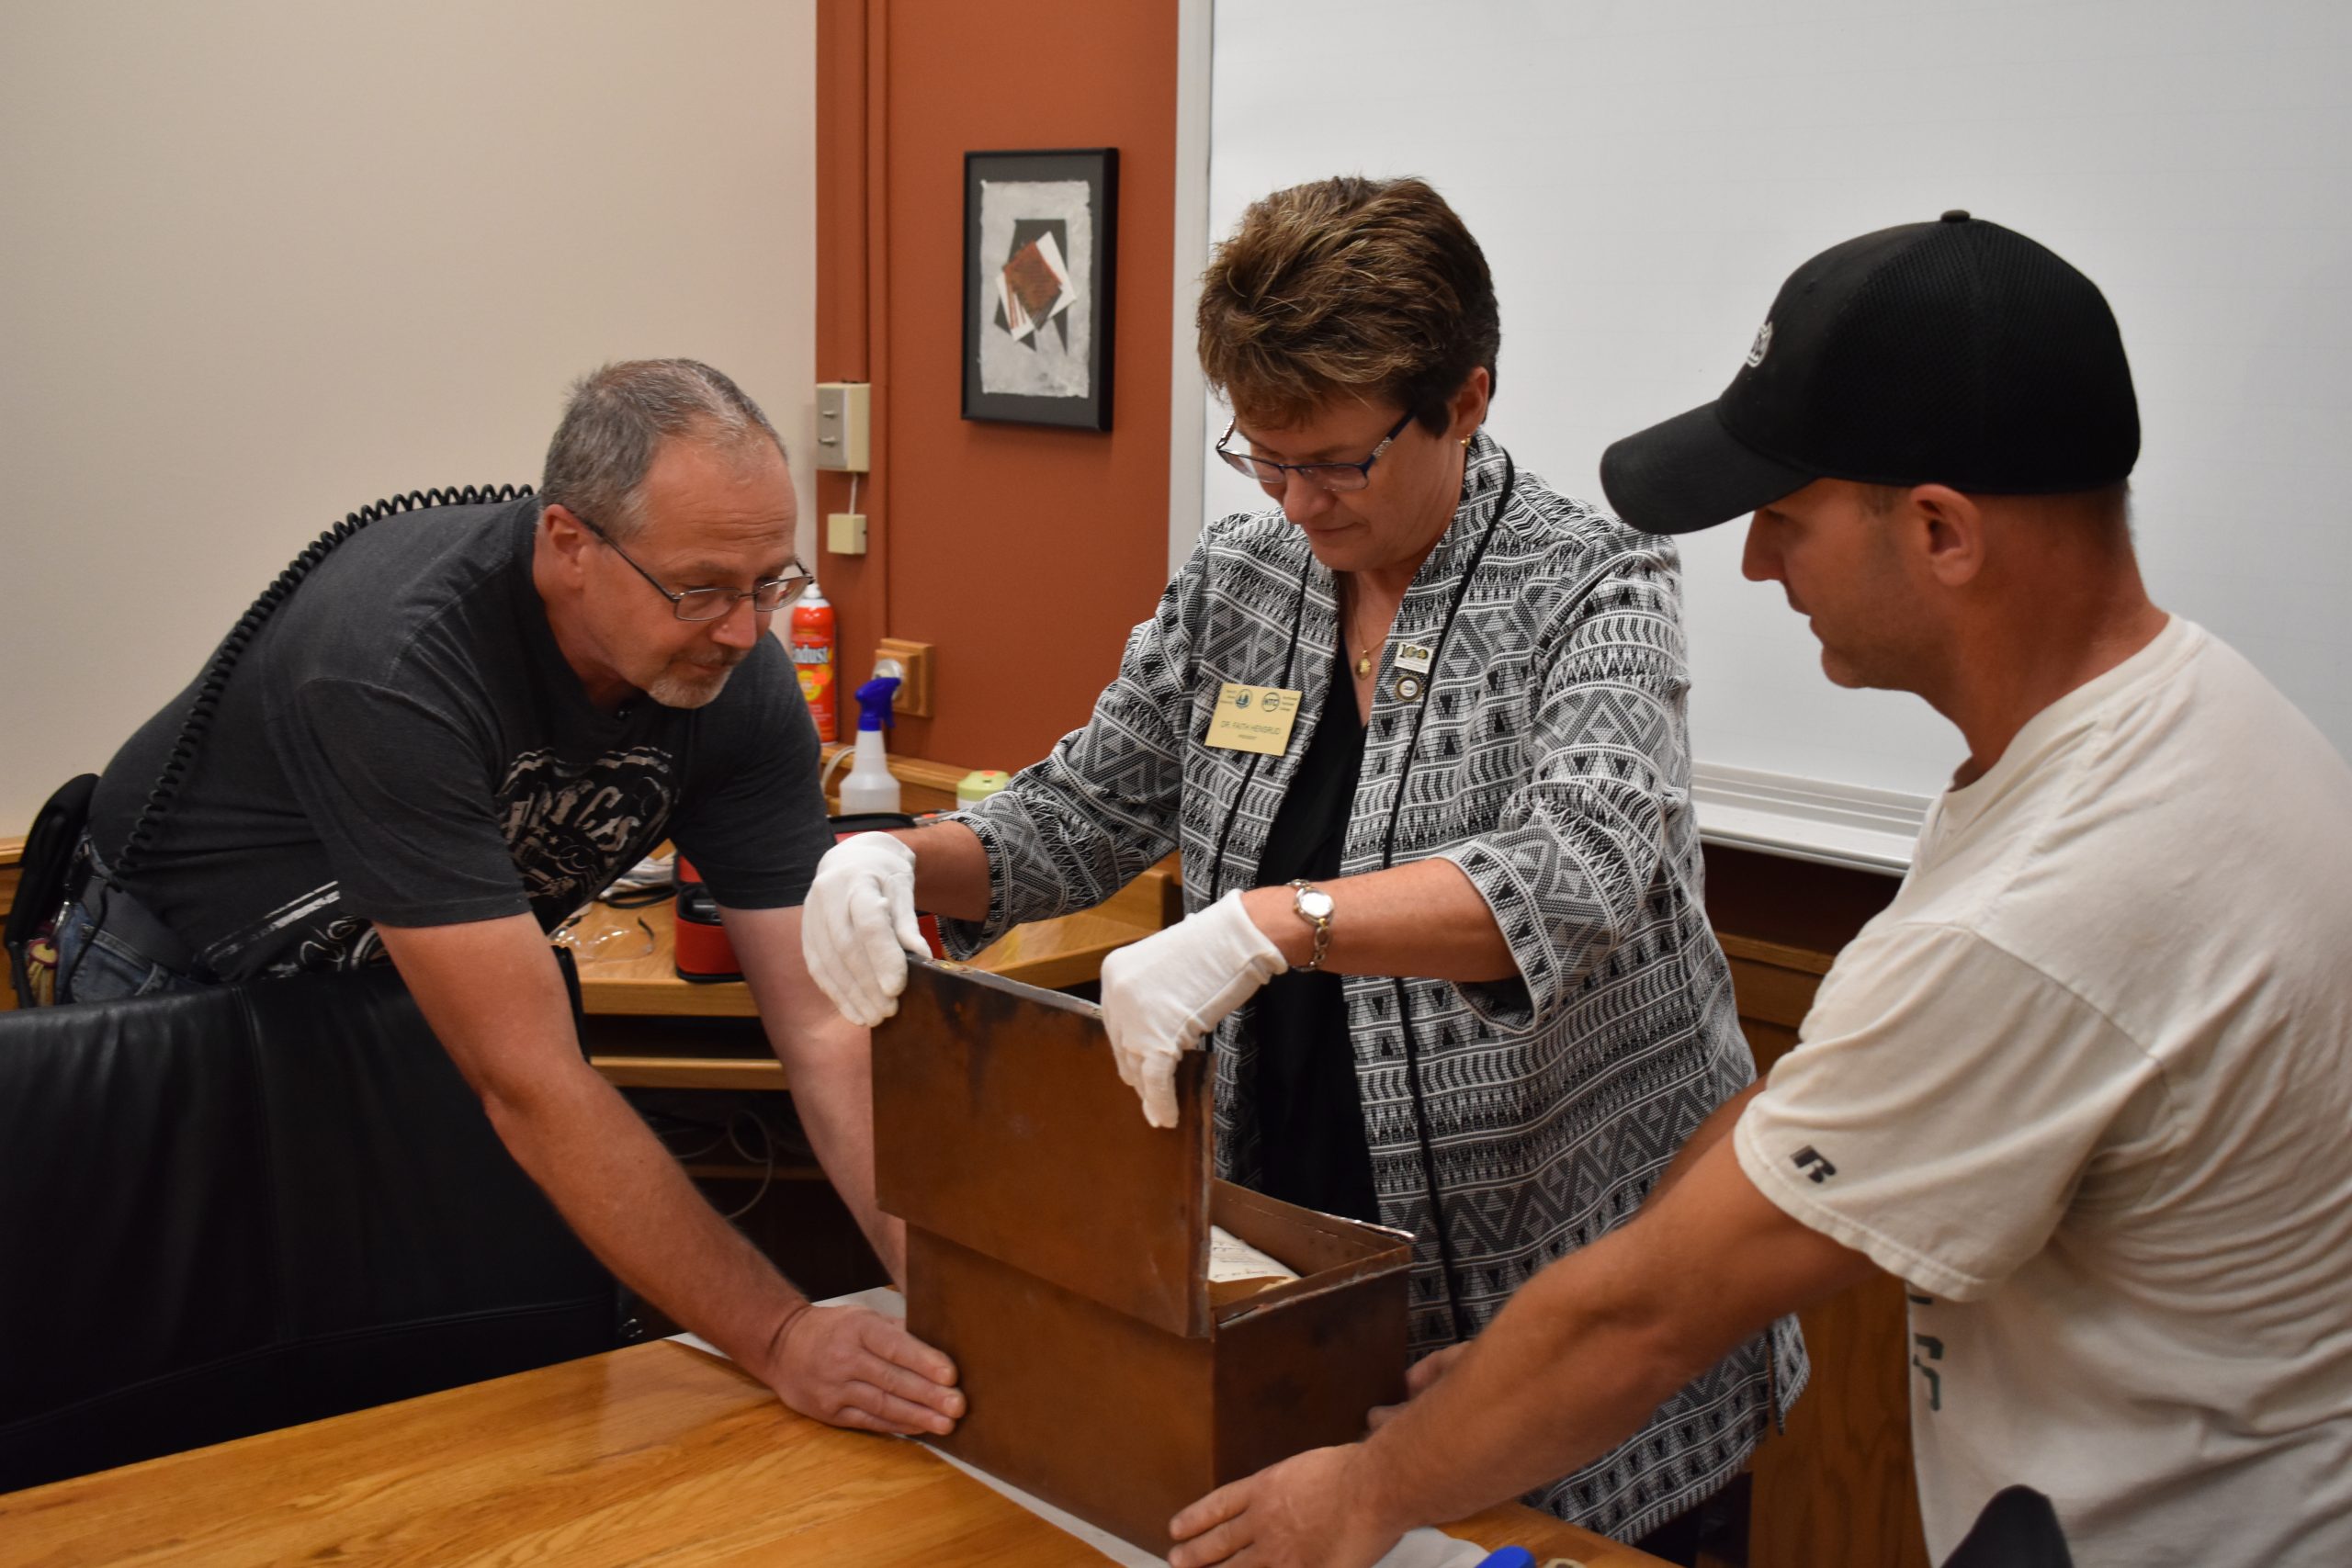 BSU President Faith Hensrud opens BSU's 1918 time capsule on Sept. 19,2019, with help from Brian Ingalls and Mitch Bannor from the BSU Buildings and Grounds staff.